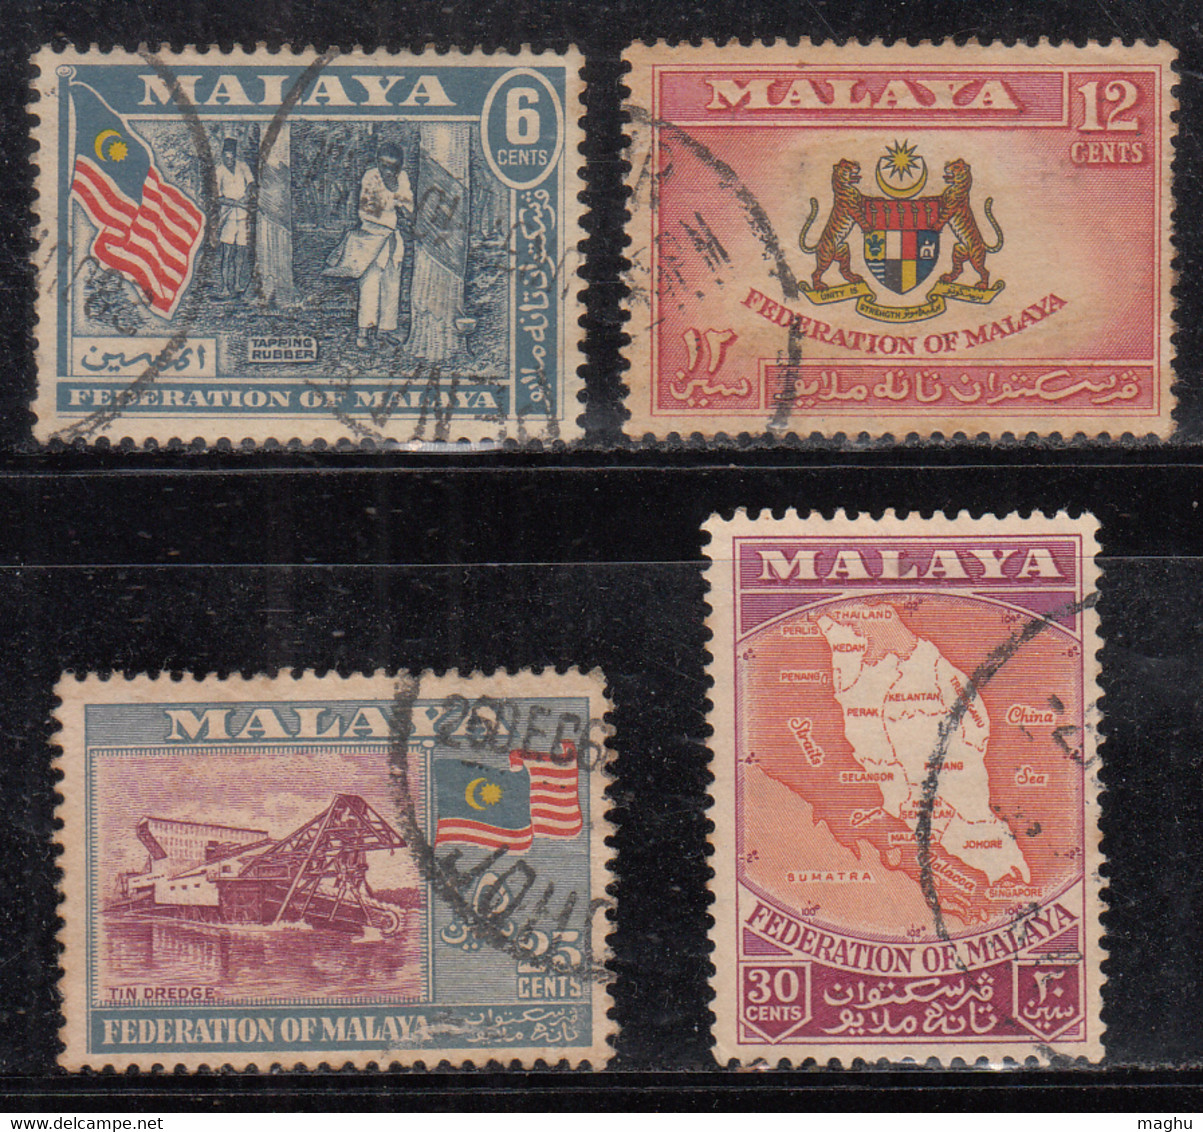 Set Of 4 Malaya Federation, Malaysia Used 1957, Rubber Tree, Job, Tin Dredger, Mineral, Coat Of Arms,  Tiger, Map, Flag - Federation Of Malaya